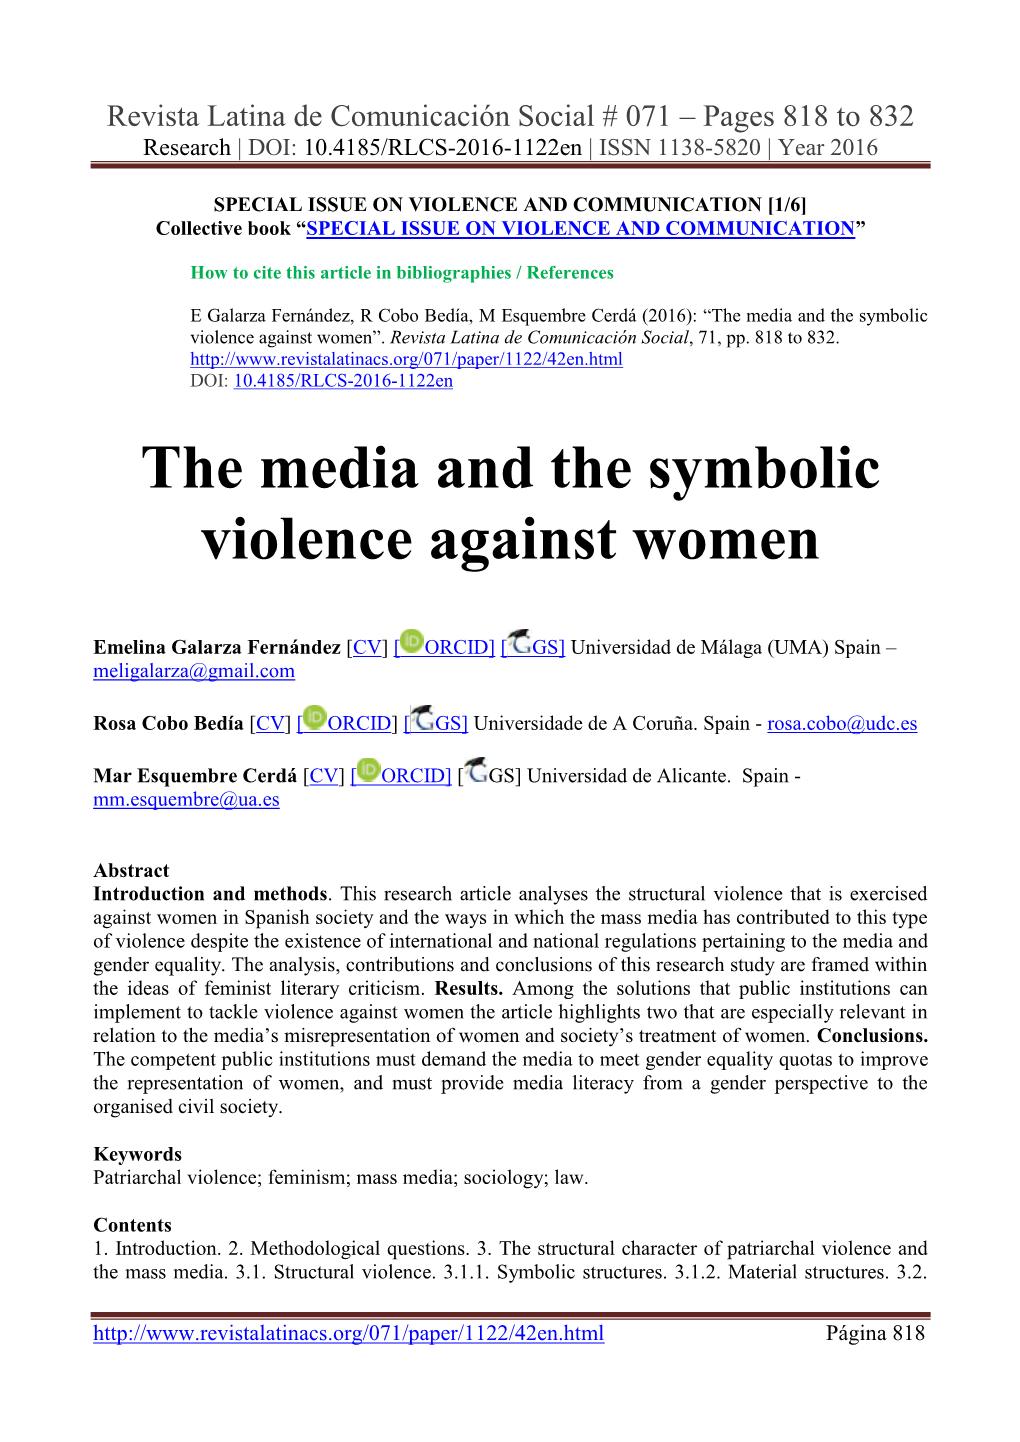 The Media and the Symbolic Violence Against Women”